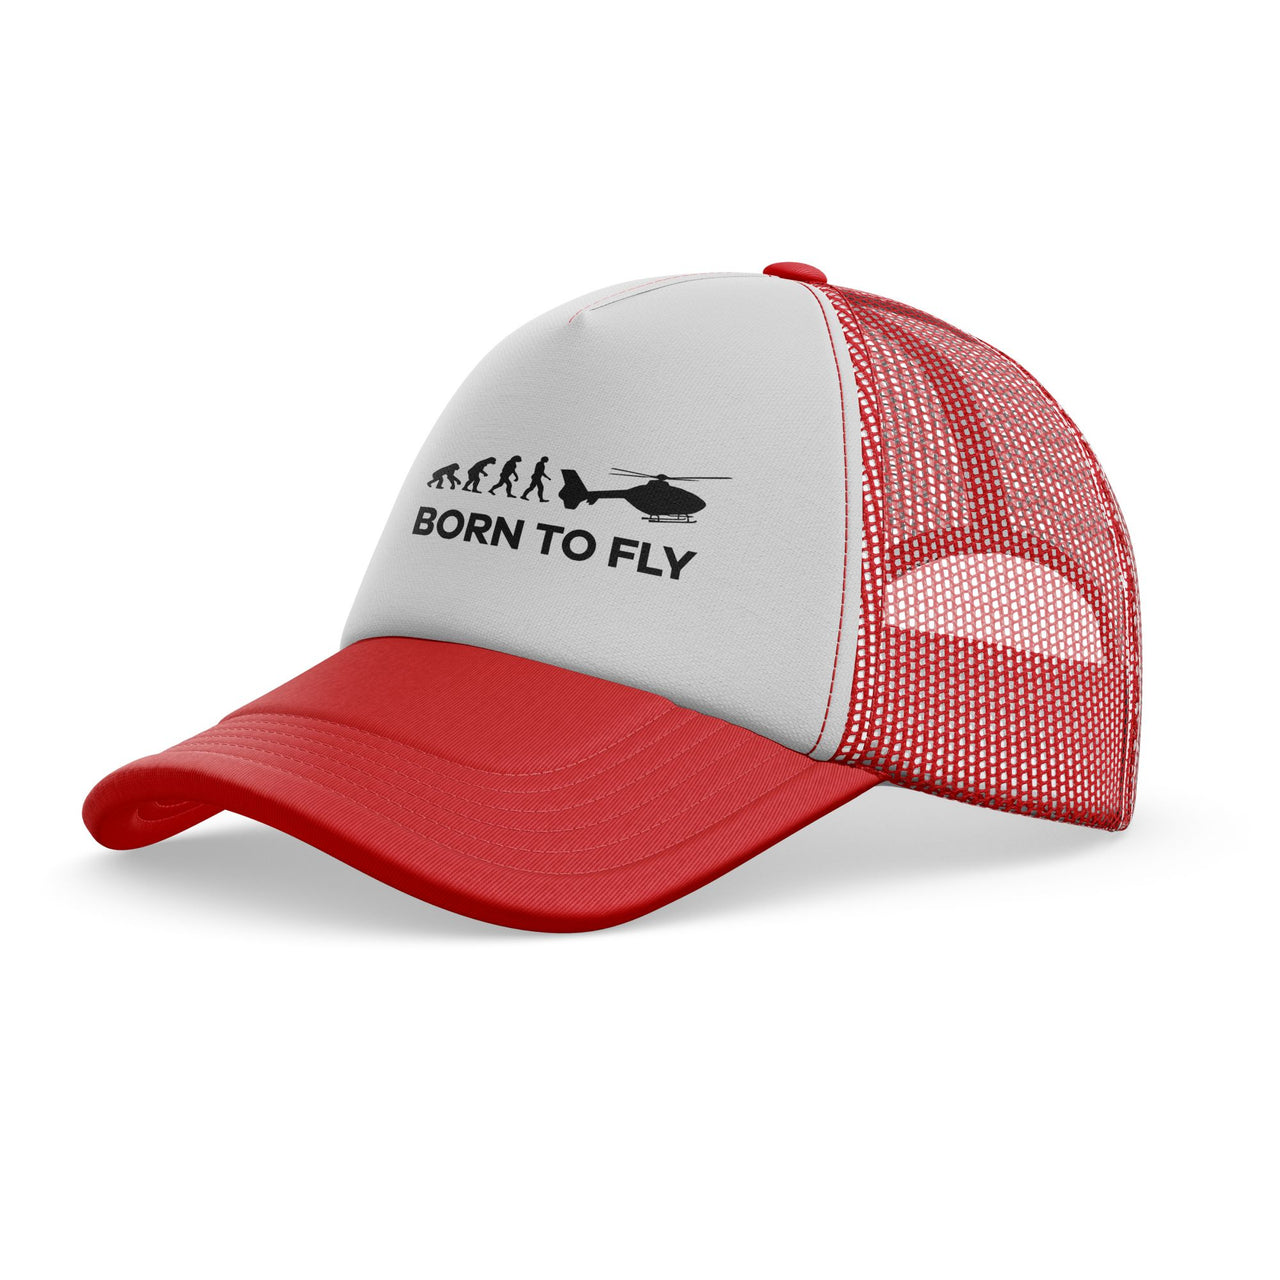 Born To Fly Helicopter Designed Trucker Caps & Hats